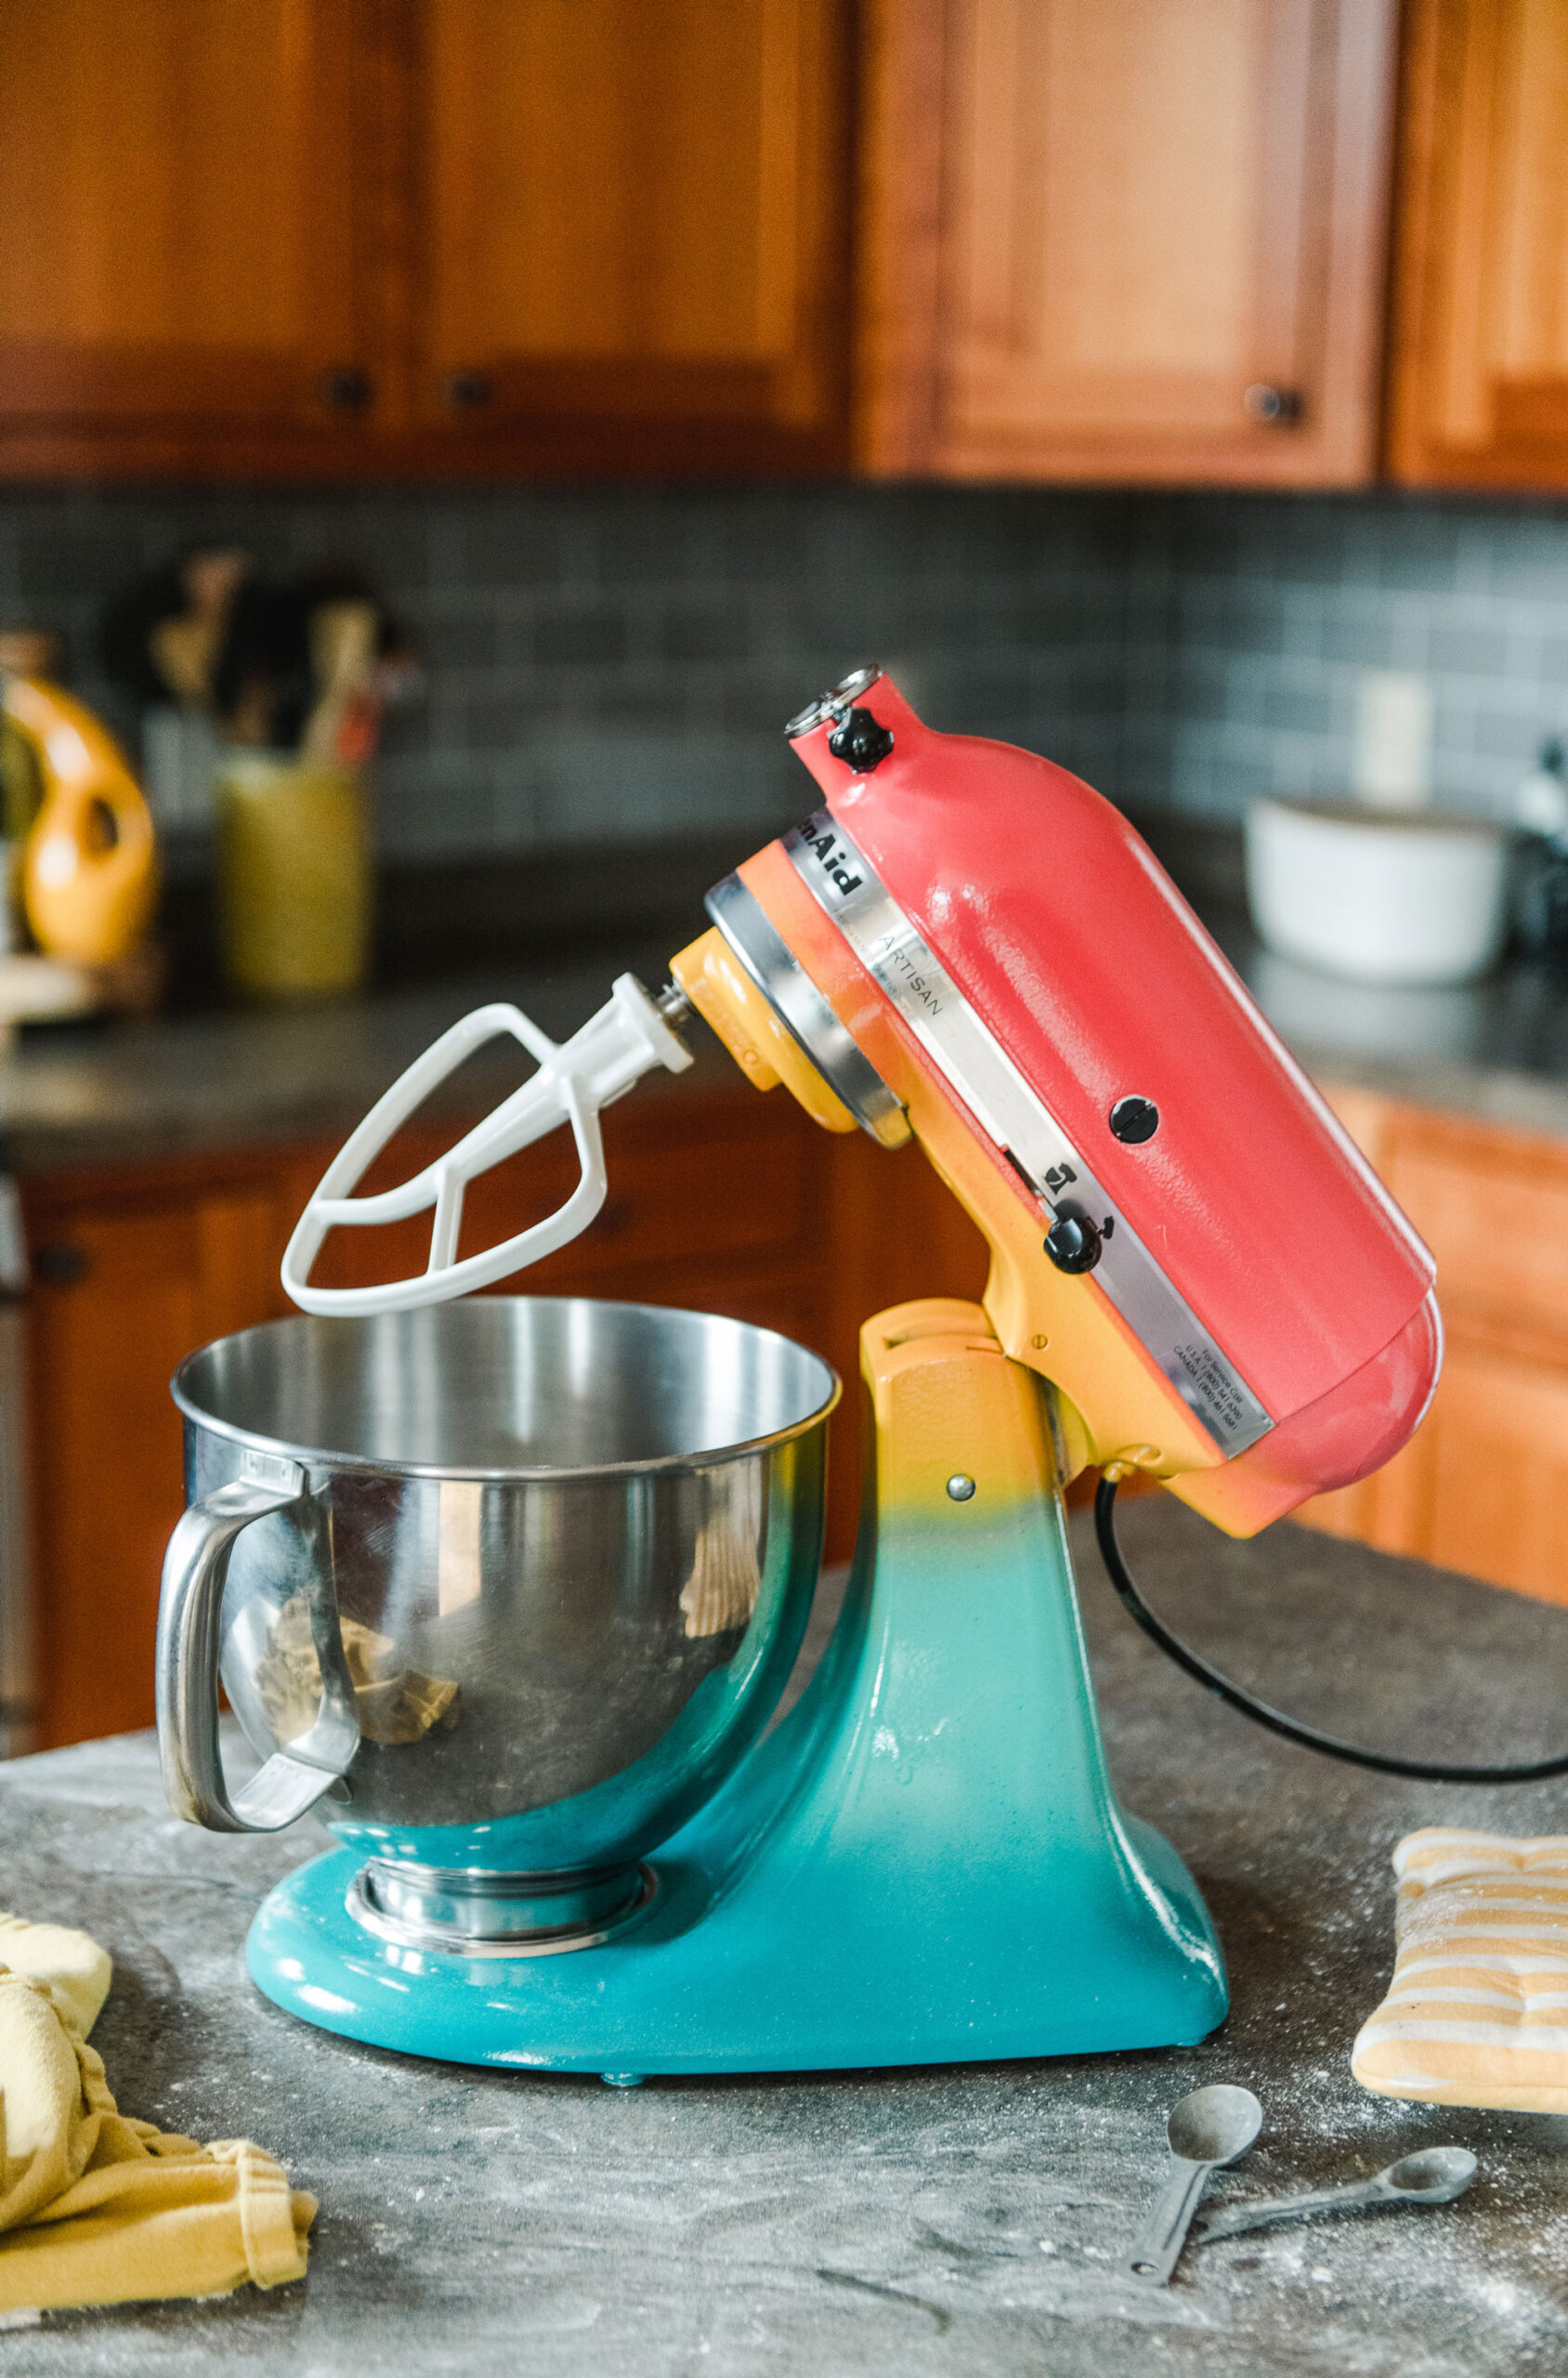 How to paint your Kitchenaid mixer!